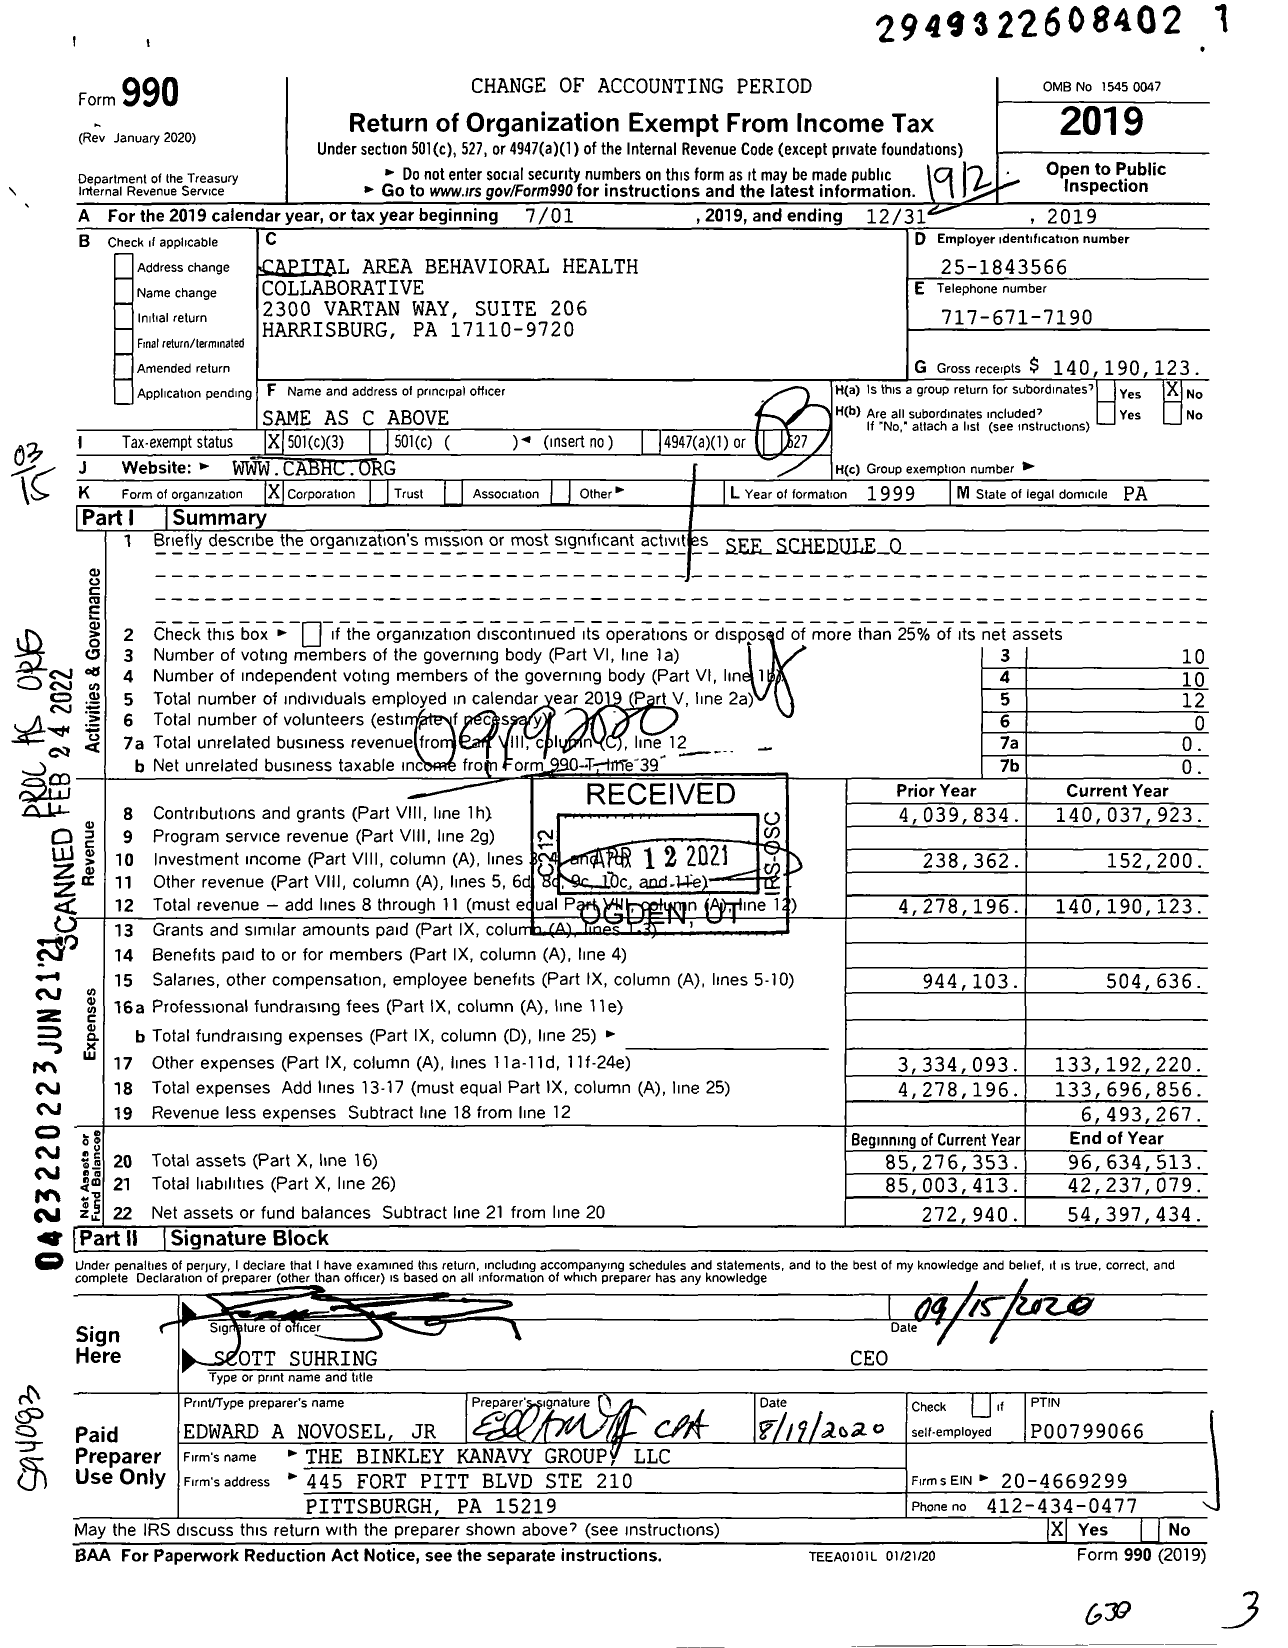 Image of first page of 2019 Form 990 for Capital Area Behavioral Health Collaborative (CABHC)